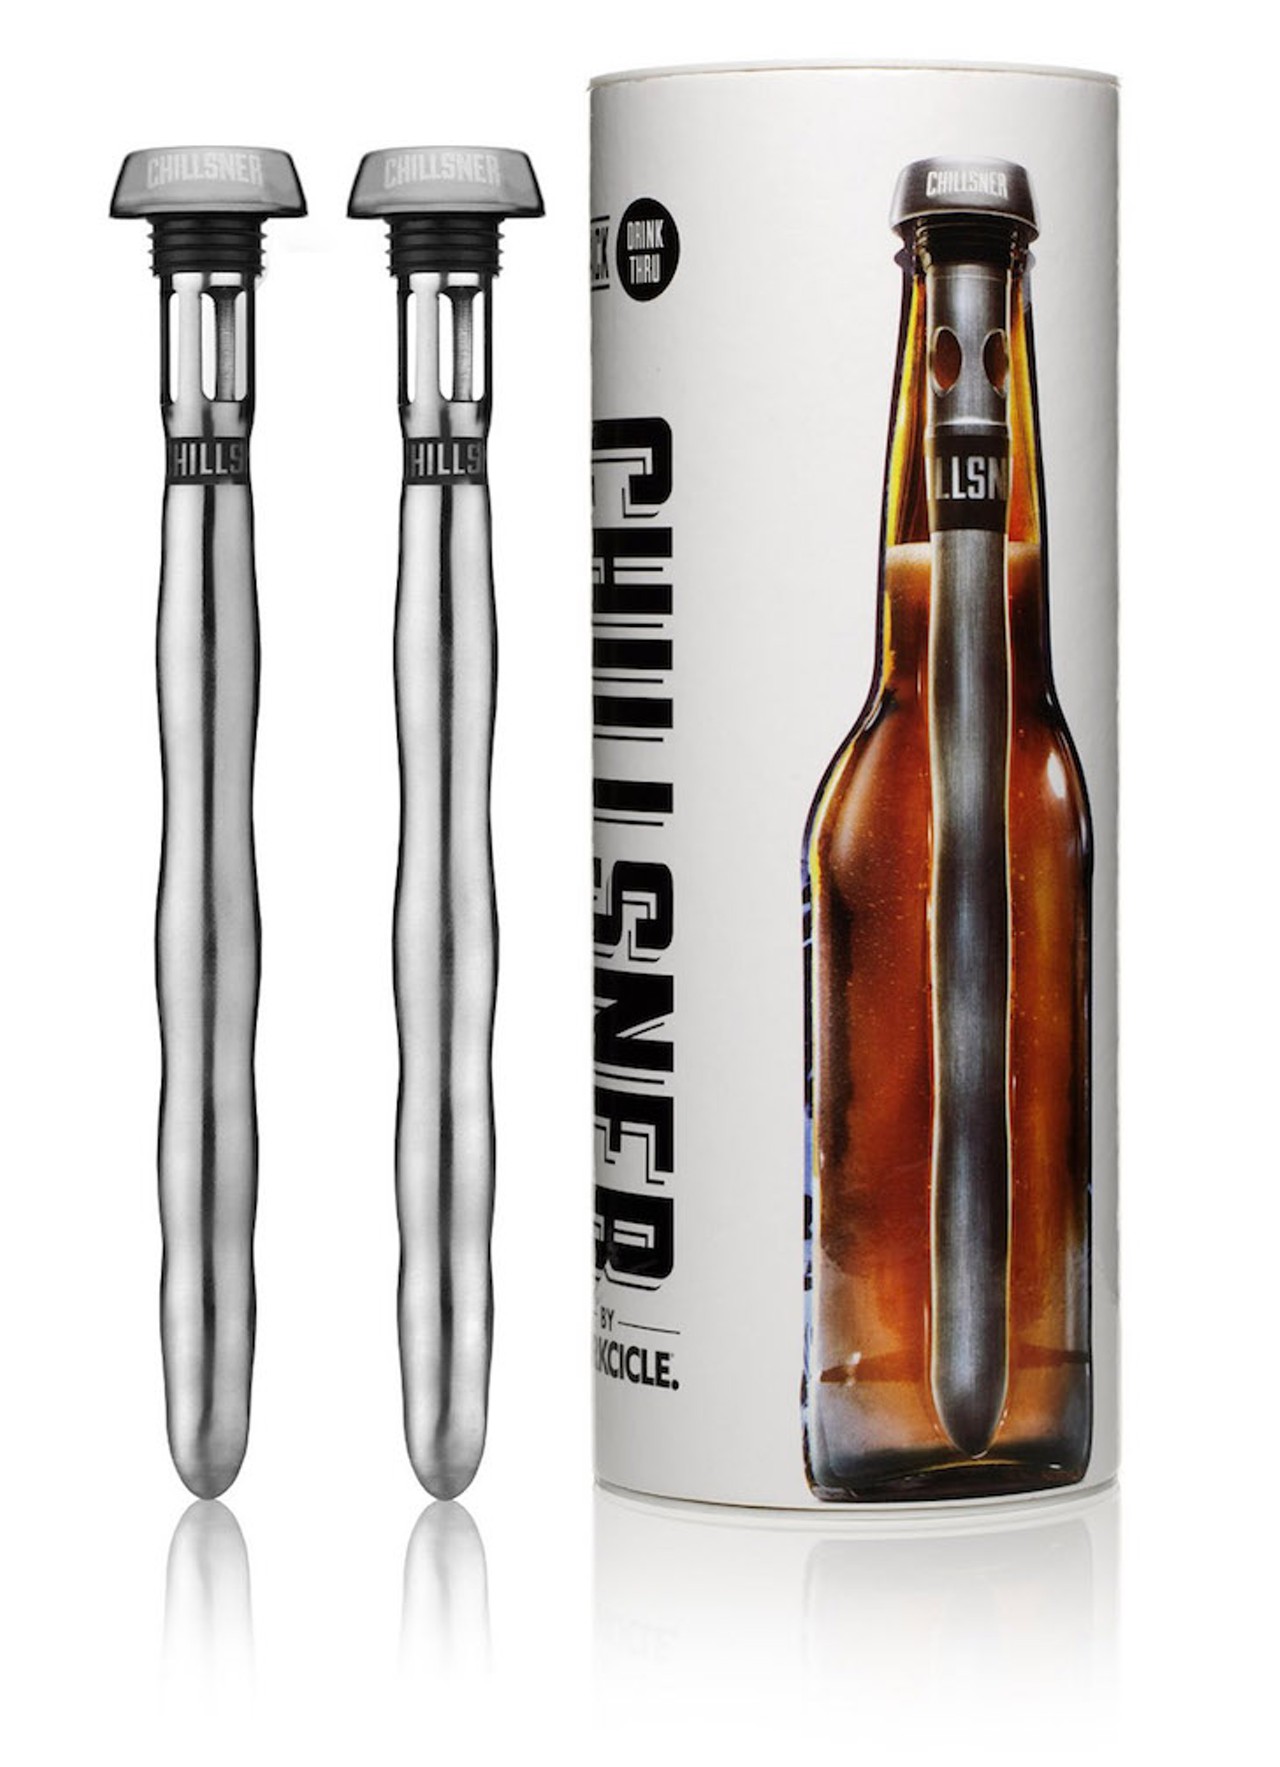 Corkcicle Chillsner Beer Chiller, $29.95 per pair, corkcicle.com
The Corkcicle seems like kind of a gag gift that you might get for someone who's known to hit the wine a little frequently: a metal "icicle" that you freeze and then plunge down the neck of a bottle of wine to keep it cool. But hey, ros&eacute; doesn't taste good warm, and they work. Corkcicle now makes a beer bottle-sized version called the Chillsner. They come in a pack of two, and if you drink as fast as we do, that should be enough to get you through a whole room-temp sixer without having to resort to the wet paper towel trick.